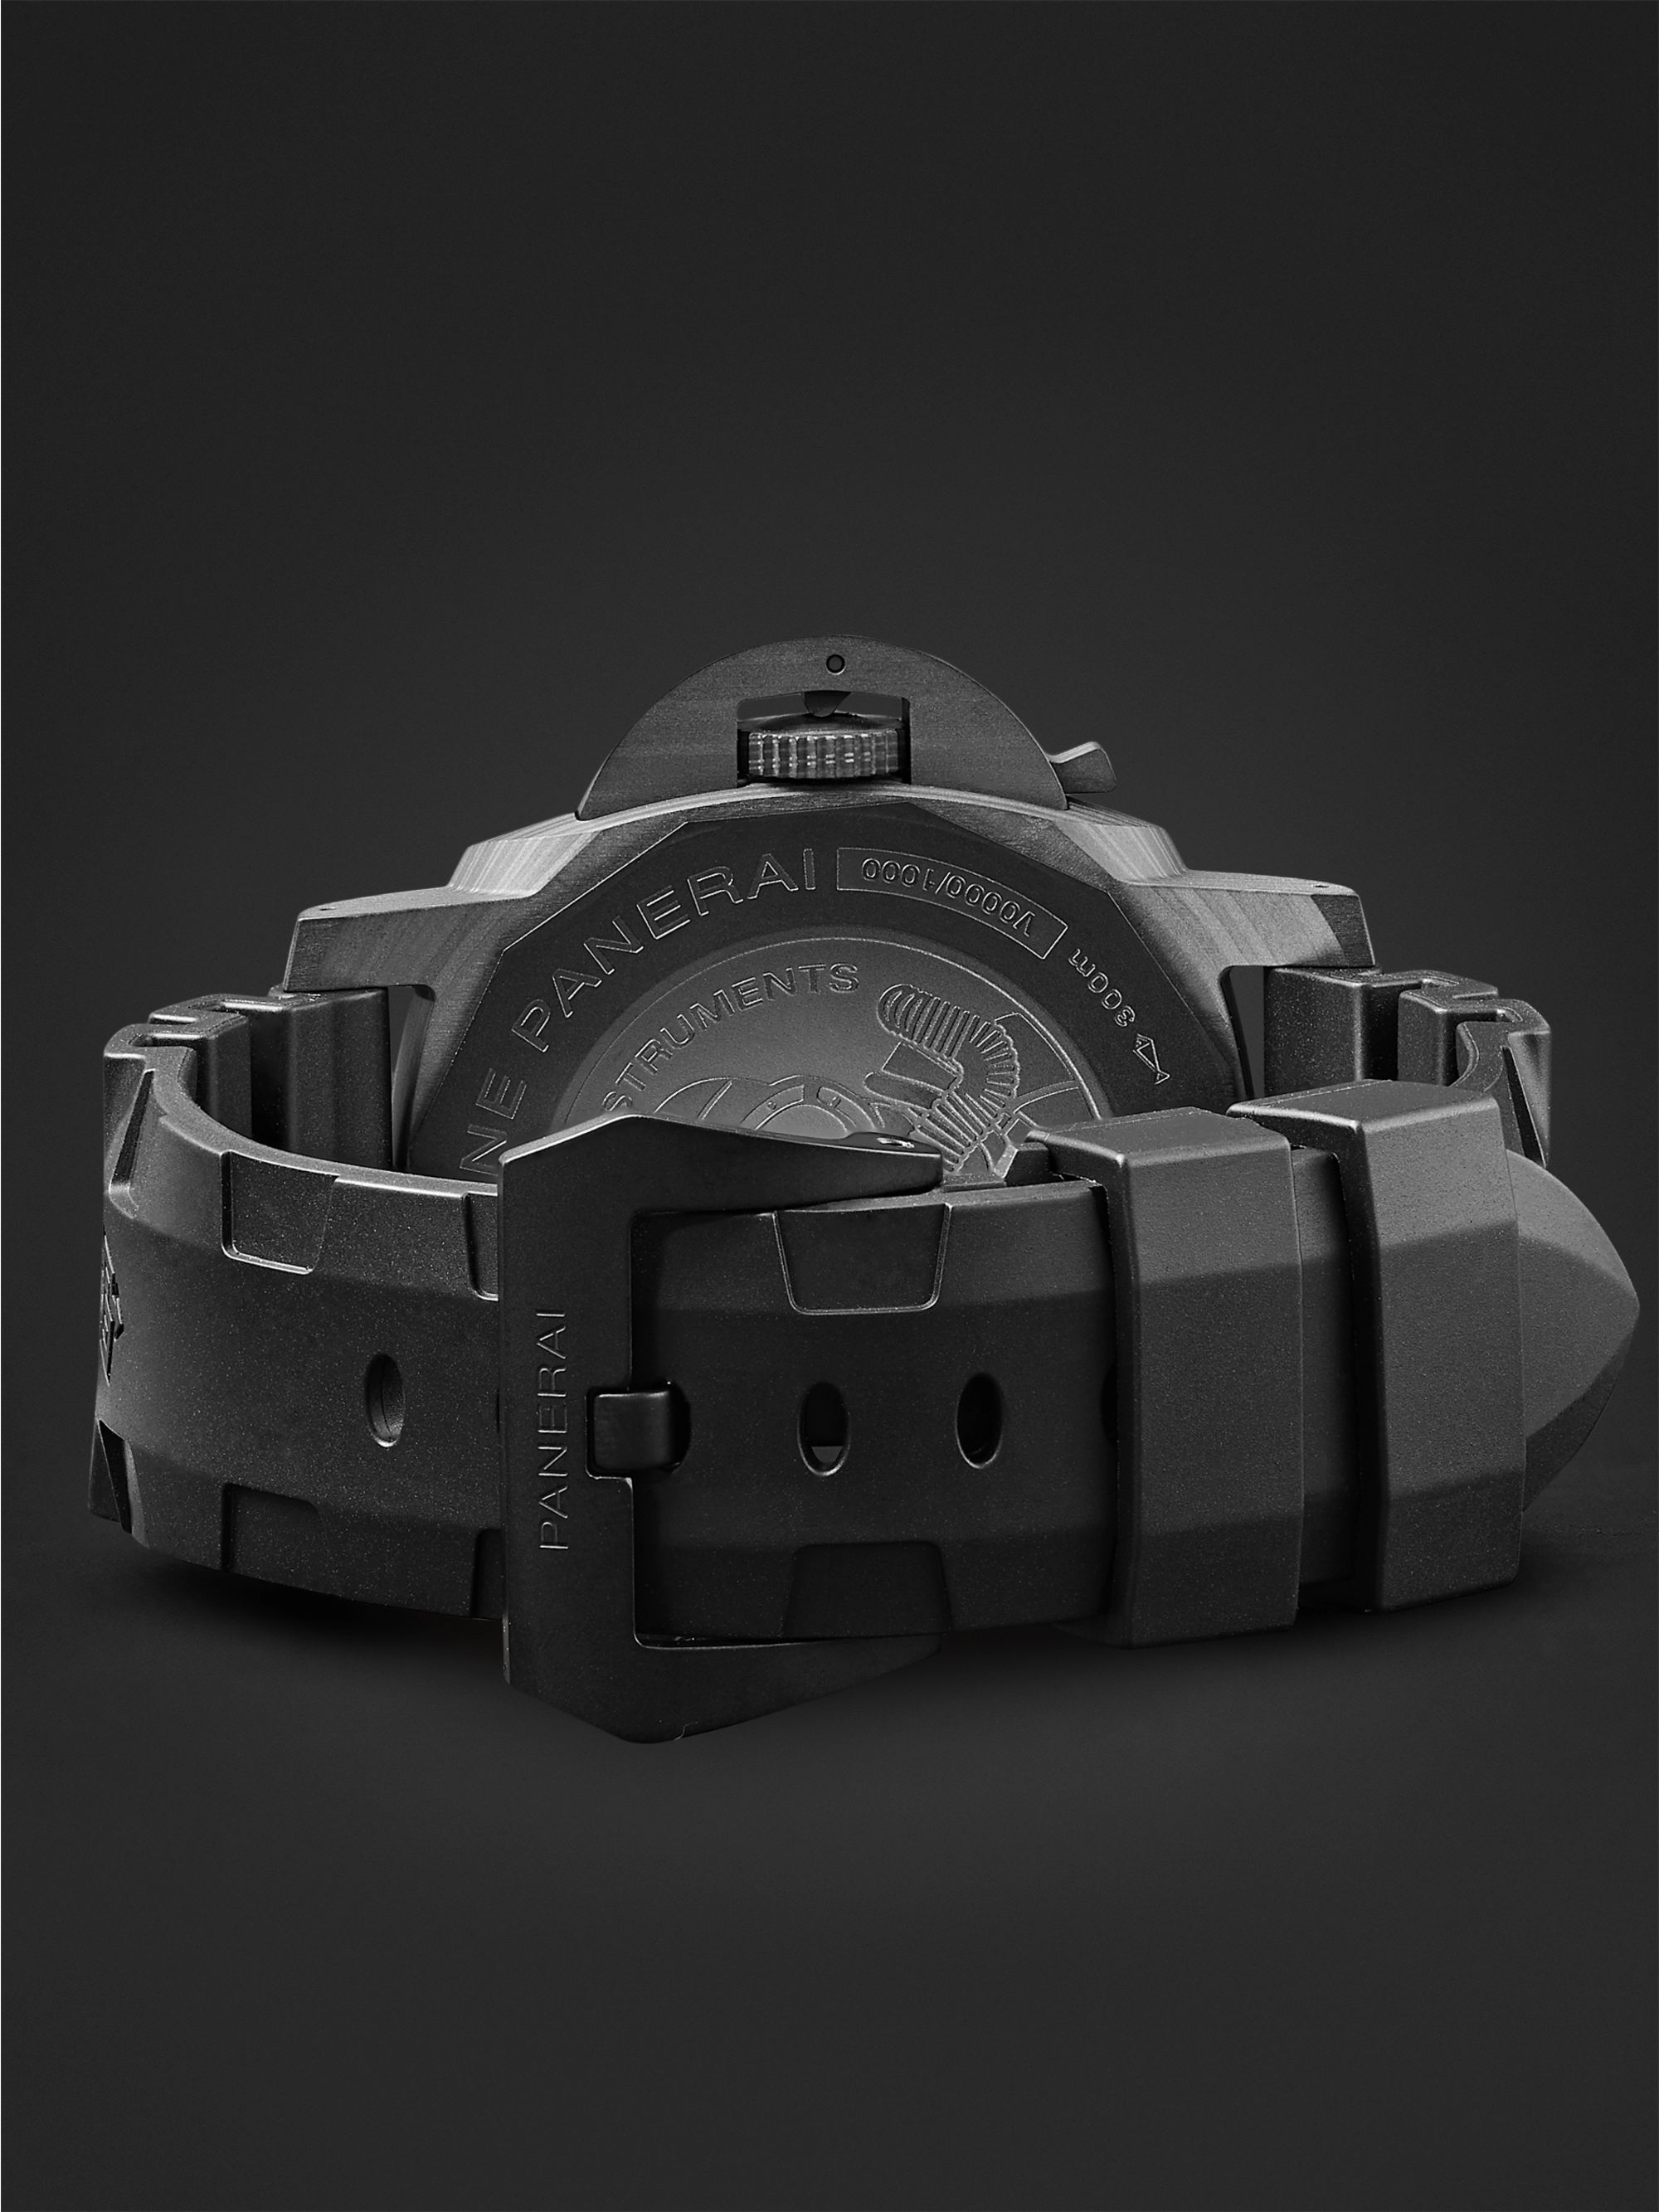 PANERAI Submersible Marina Militare Automatic 47mm Carbotech and Rubber Watch, Ref. No. PAM00979